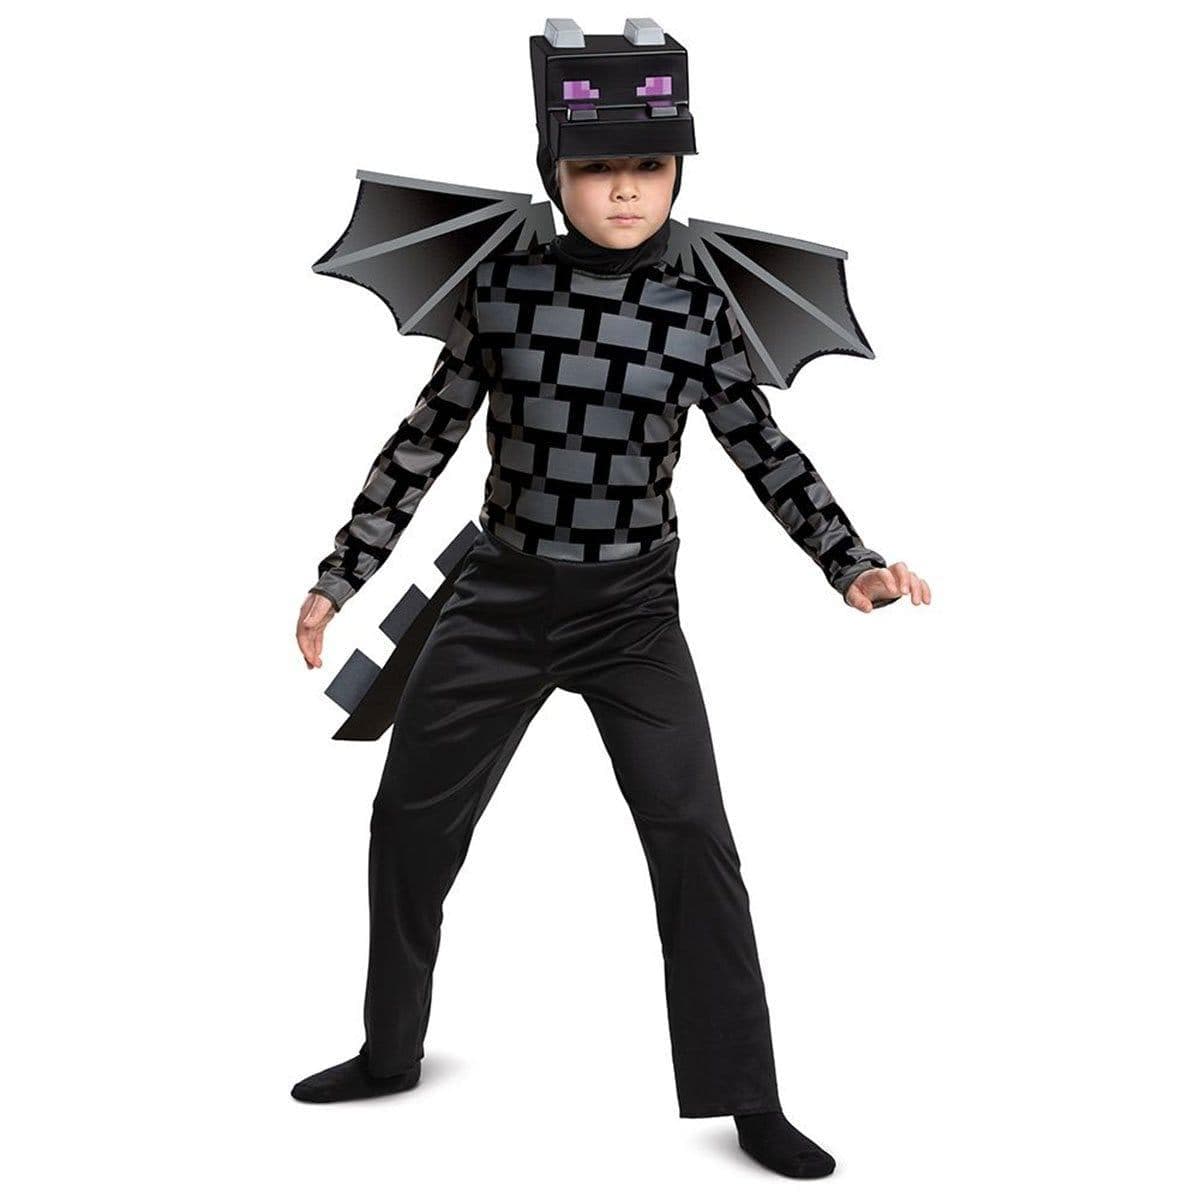 Wither Storm Costume Cosplay  Storm costume, Minecraft costumes, Minecraft  birthday